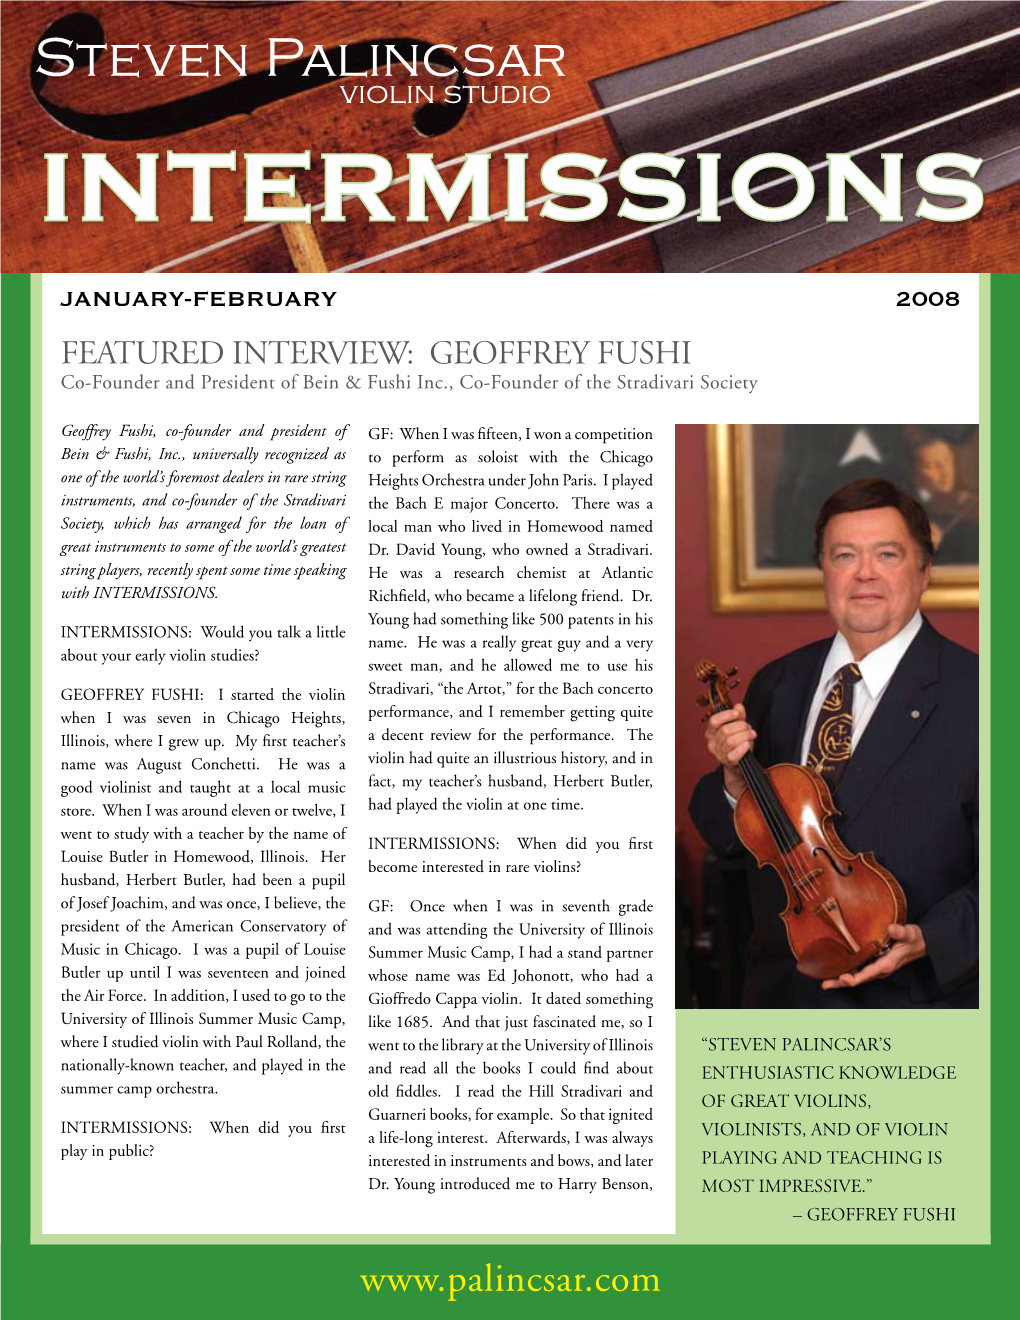 January-February 2008 FEATURED INTERVIEW: GEOFFREY FUSHI Co-Founder and President of Bein & Fushi Inc., Co-Founder of the Stradivari Society